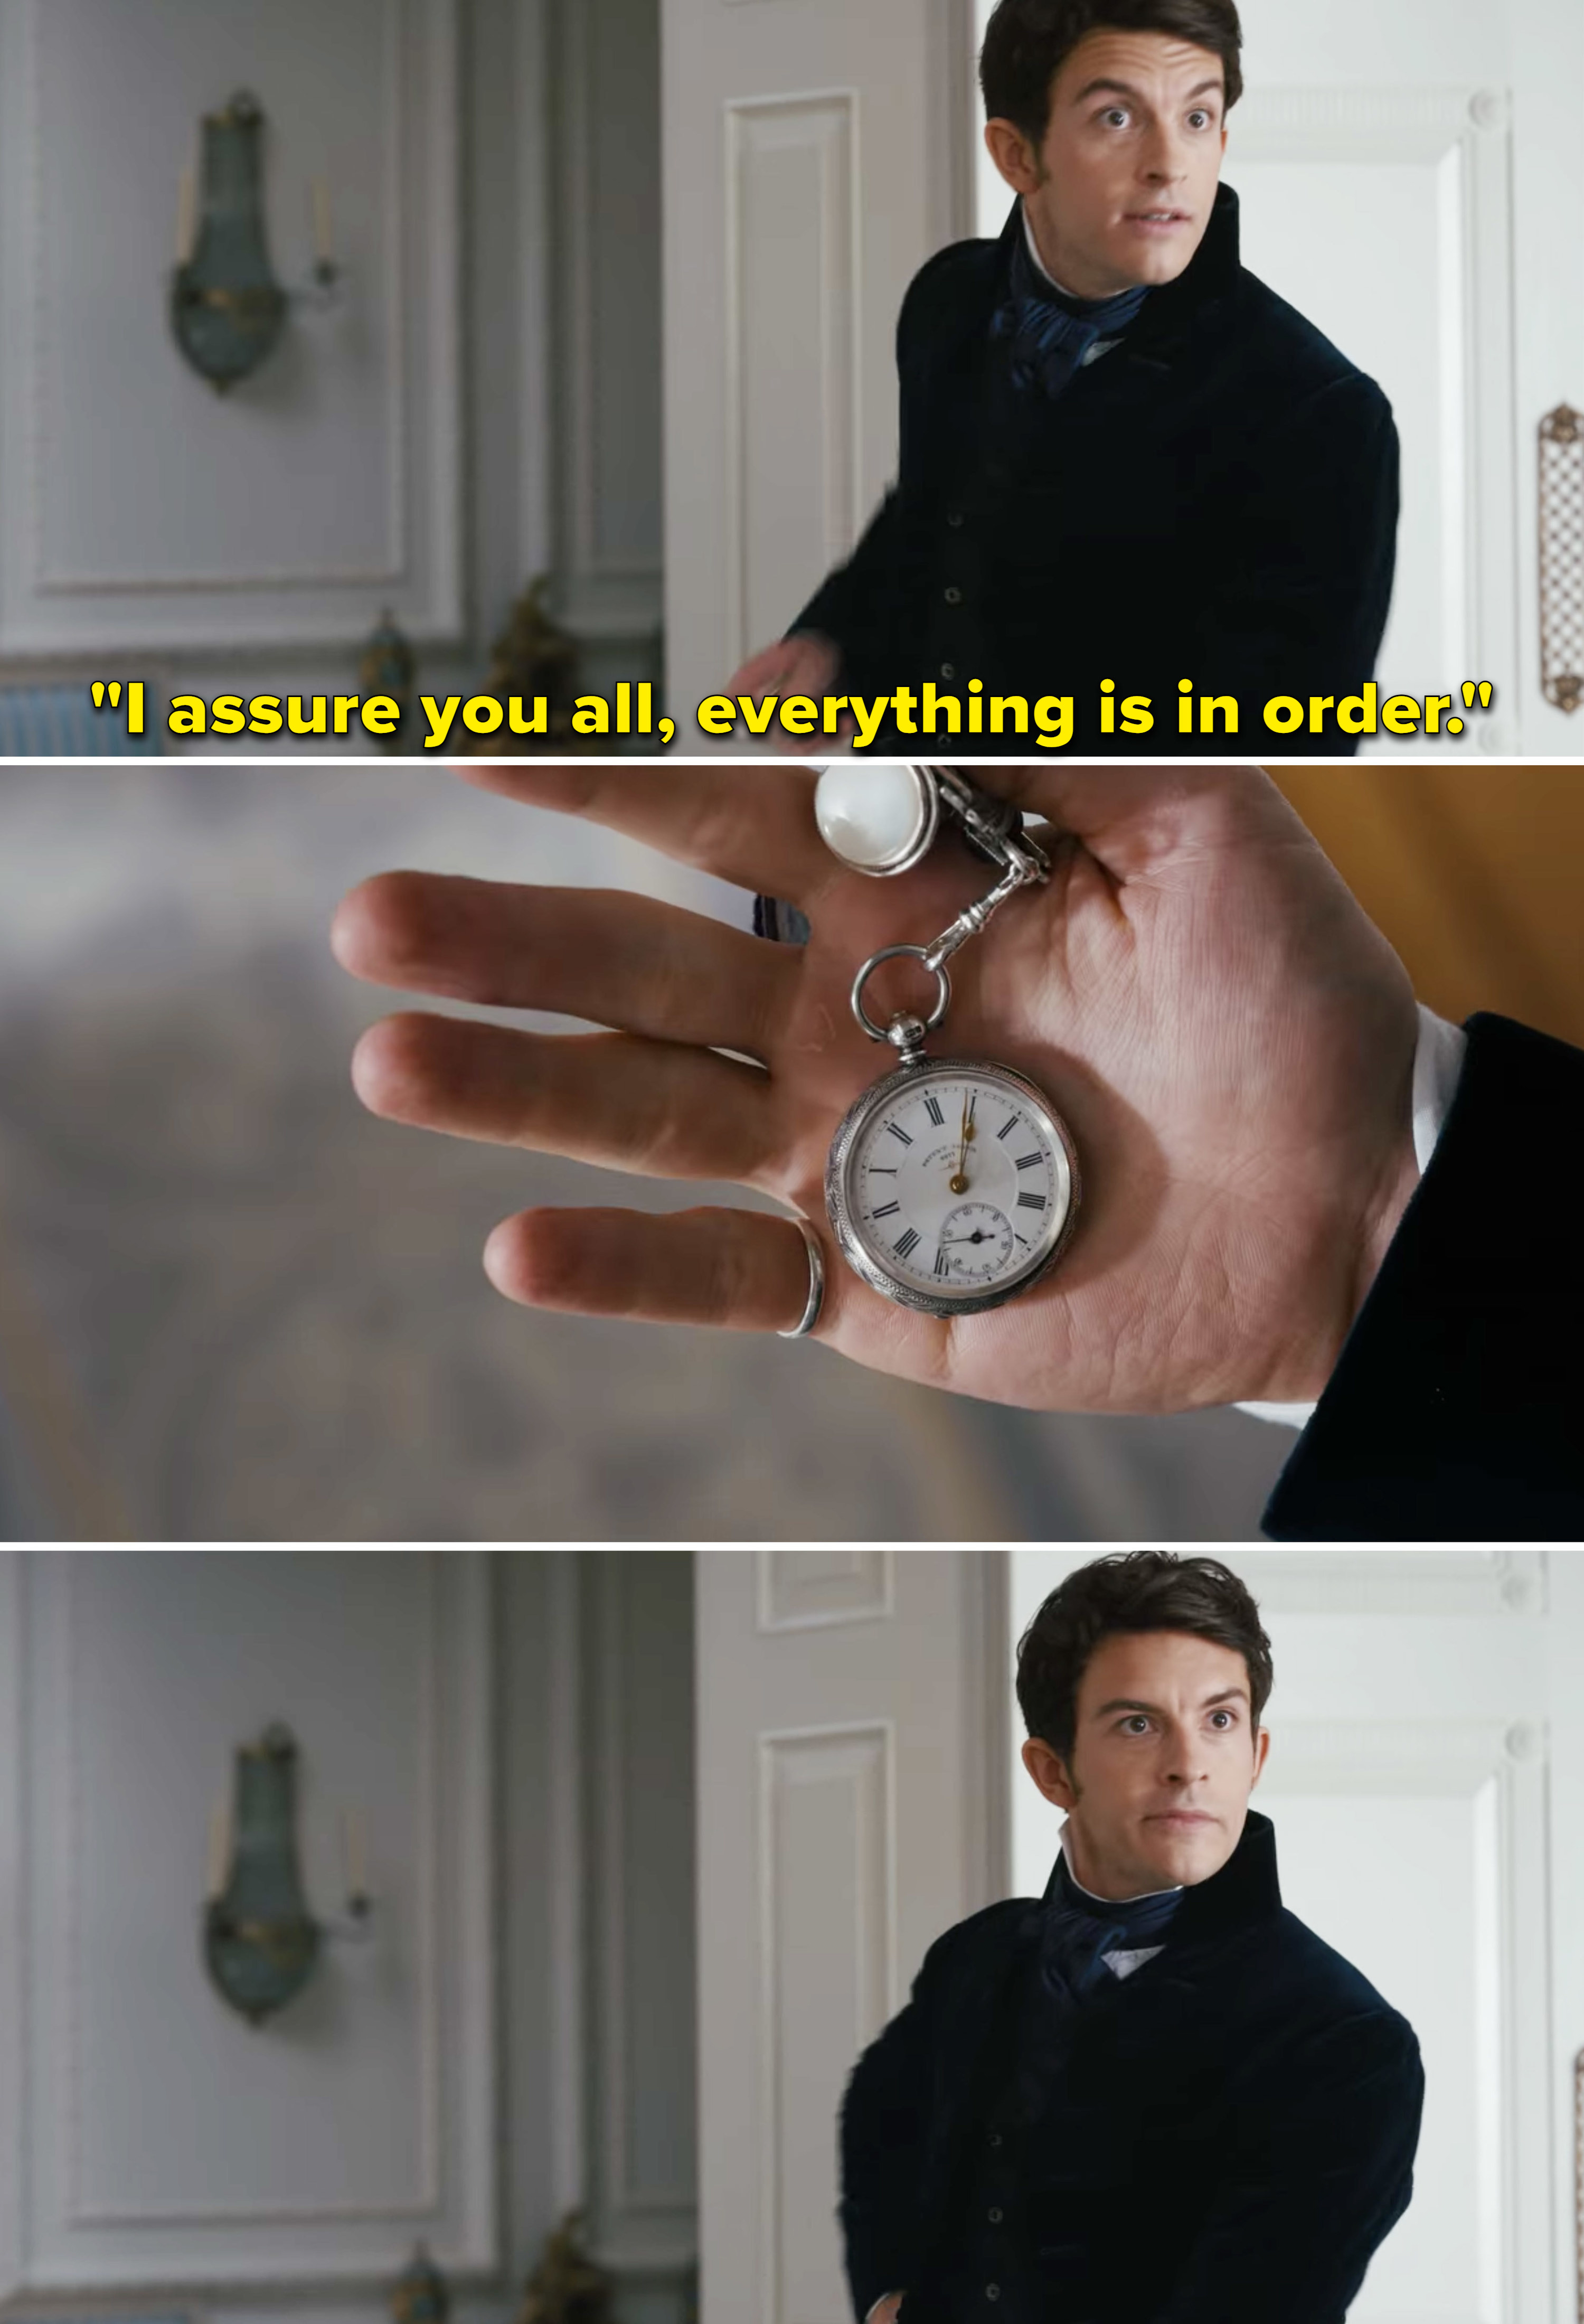 Anthony saying, &quot;I assure you all, everything is in order&quot; and holding a watch